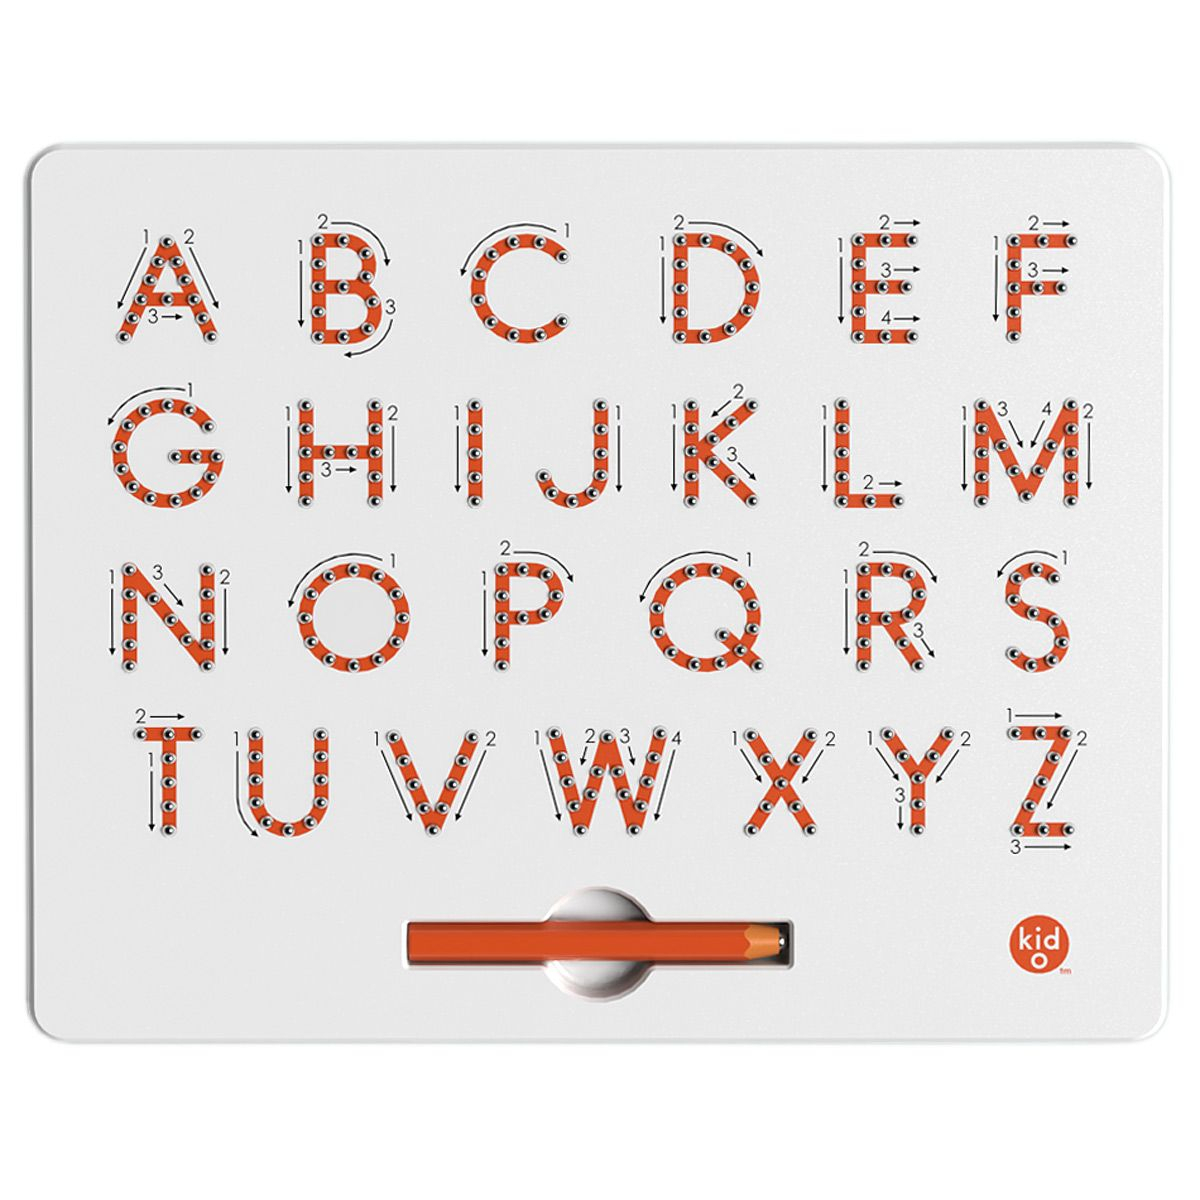 A-To-Z Magnetic Tablet | Educational Toy, For Kids, Alphabet intended for Alphabet Tracing Tablet